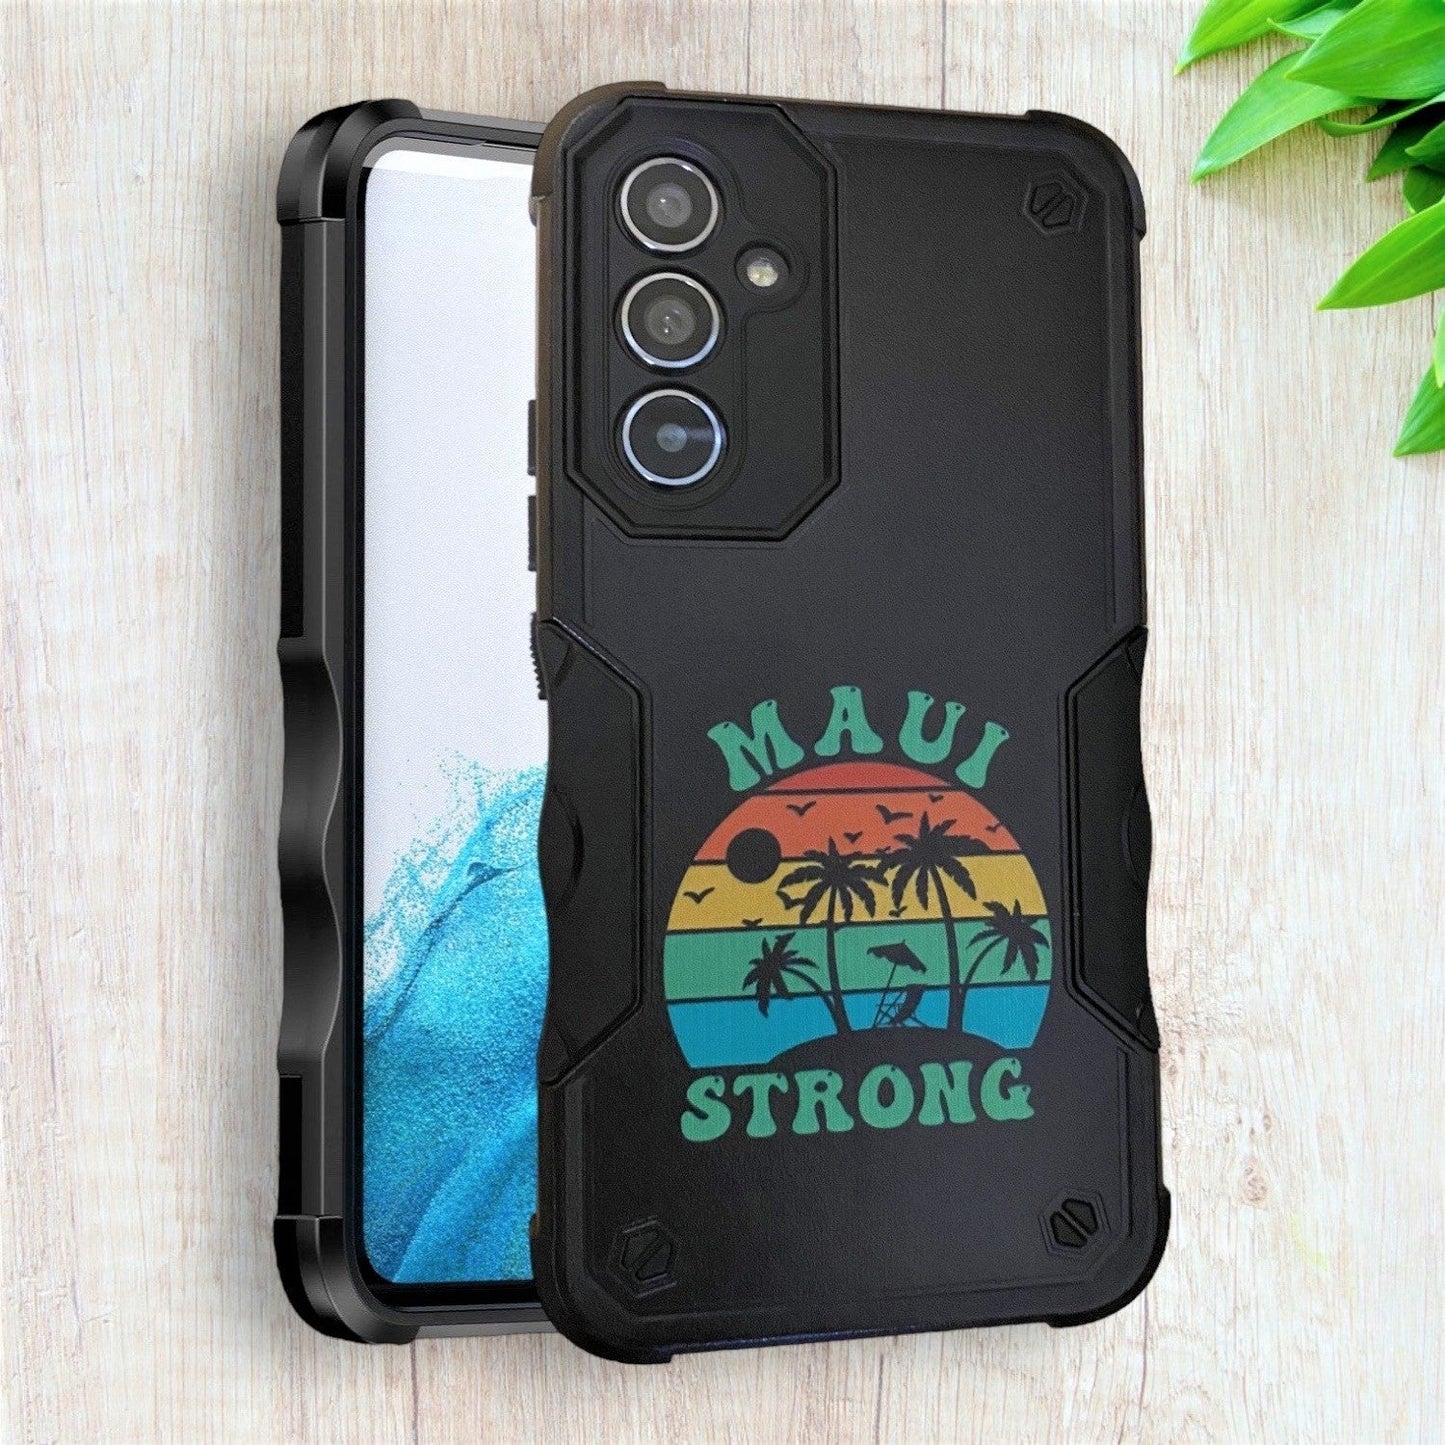 For Motorola - Maui Strong Phone Case, All Profits will be Donated, Support for Hawaii Fire Victims, Maui Wildfire Relief, Hawaii Fires, Lahaina Fires (Design & Print in the USA)